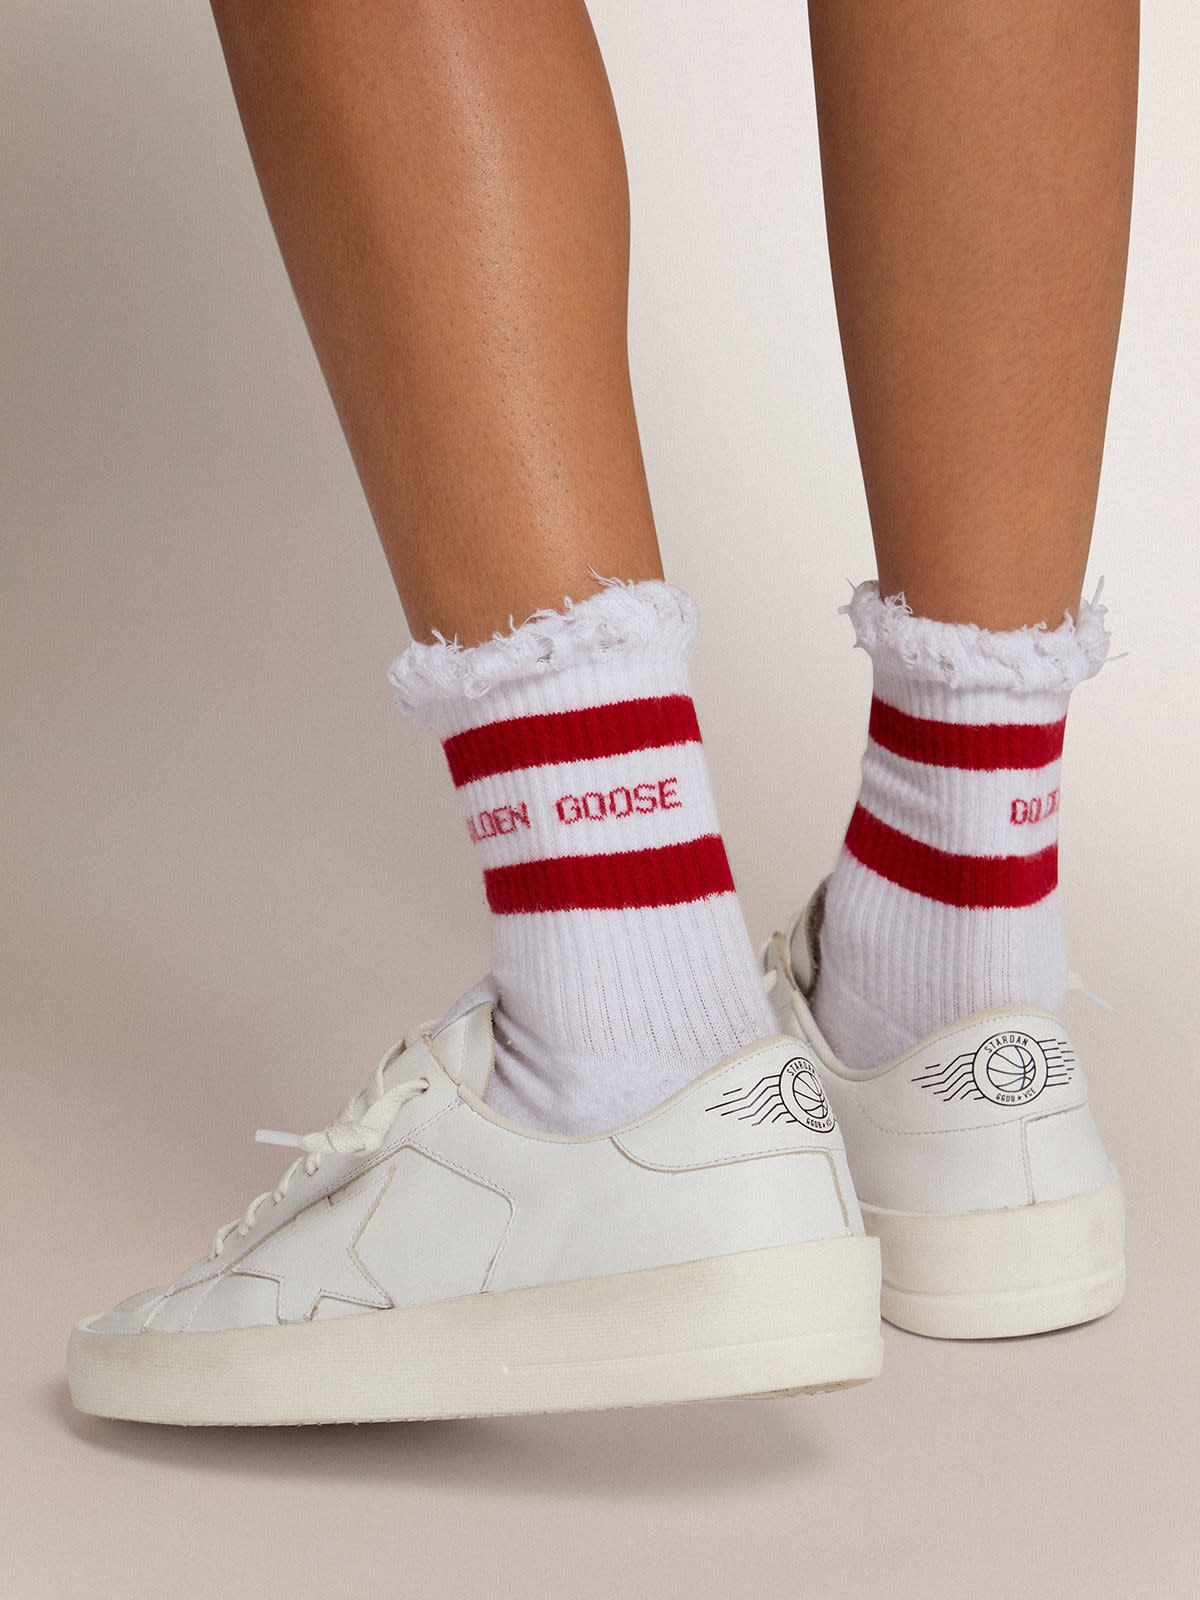 Cotton socks with distressed finishes, red stripes and logo - 3